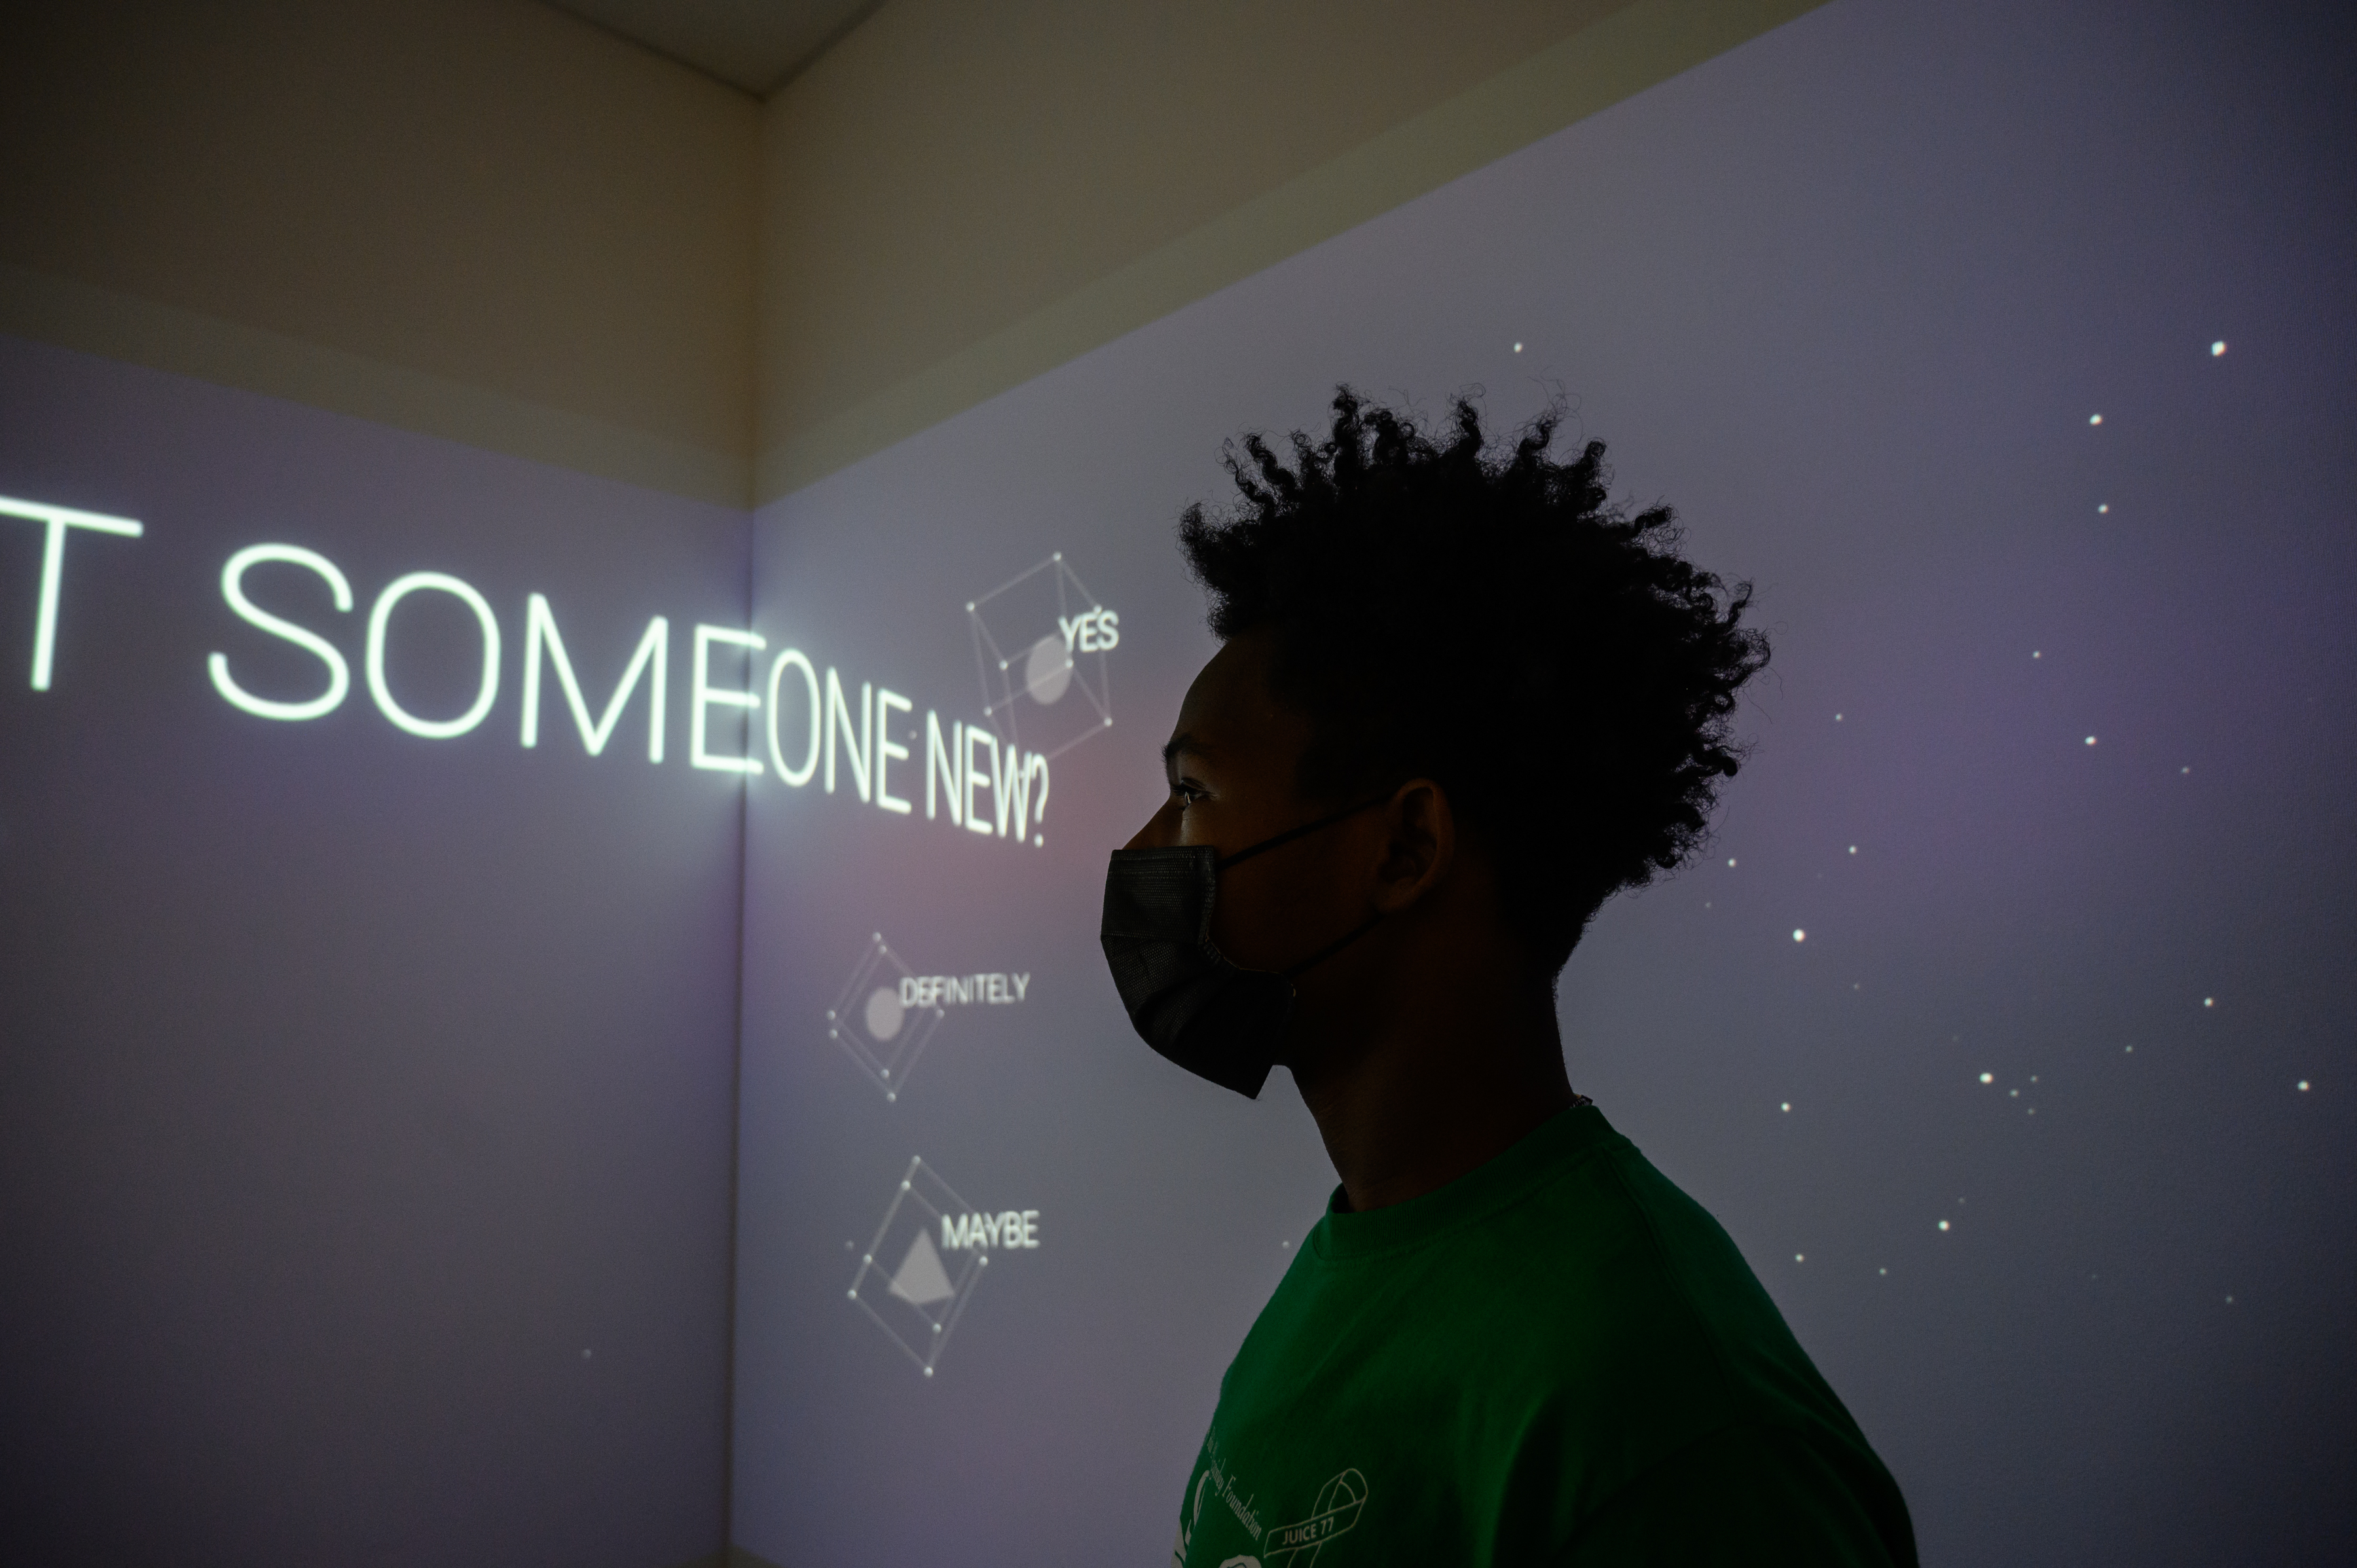 LEAP student, Brandon, silhouetted against a room with projections